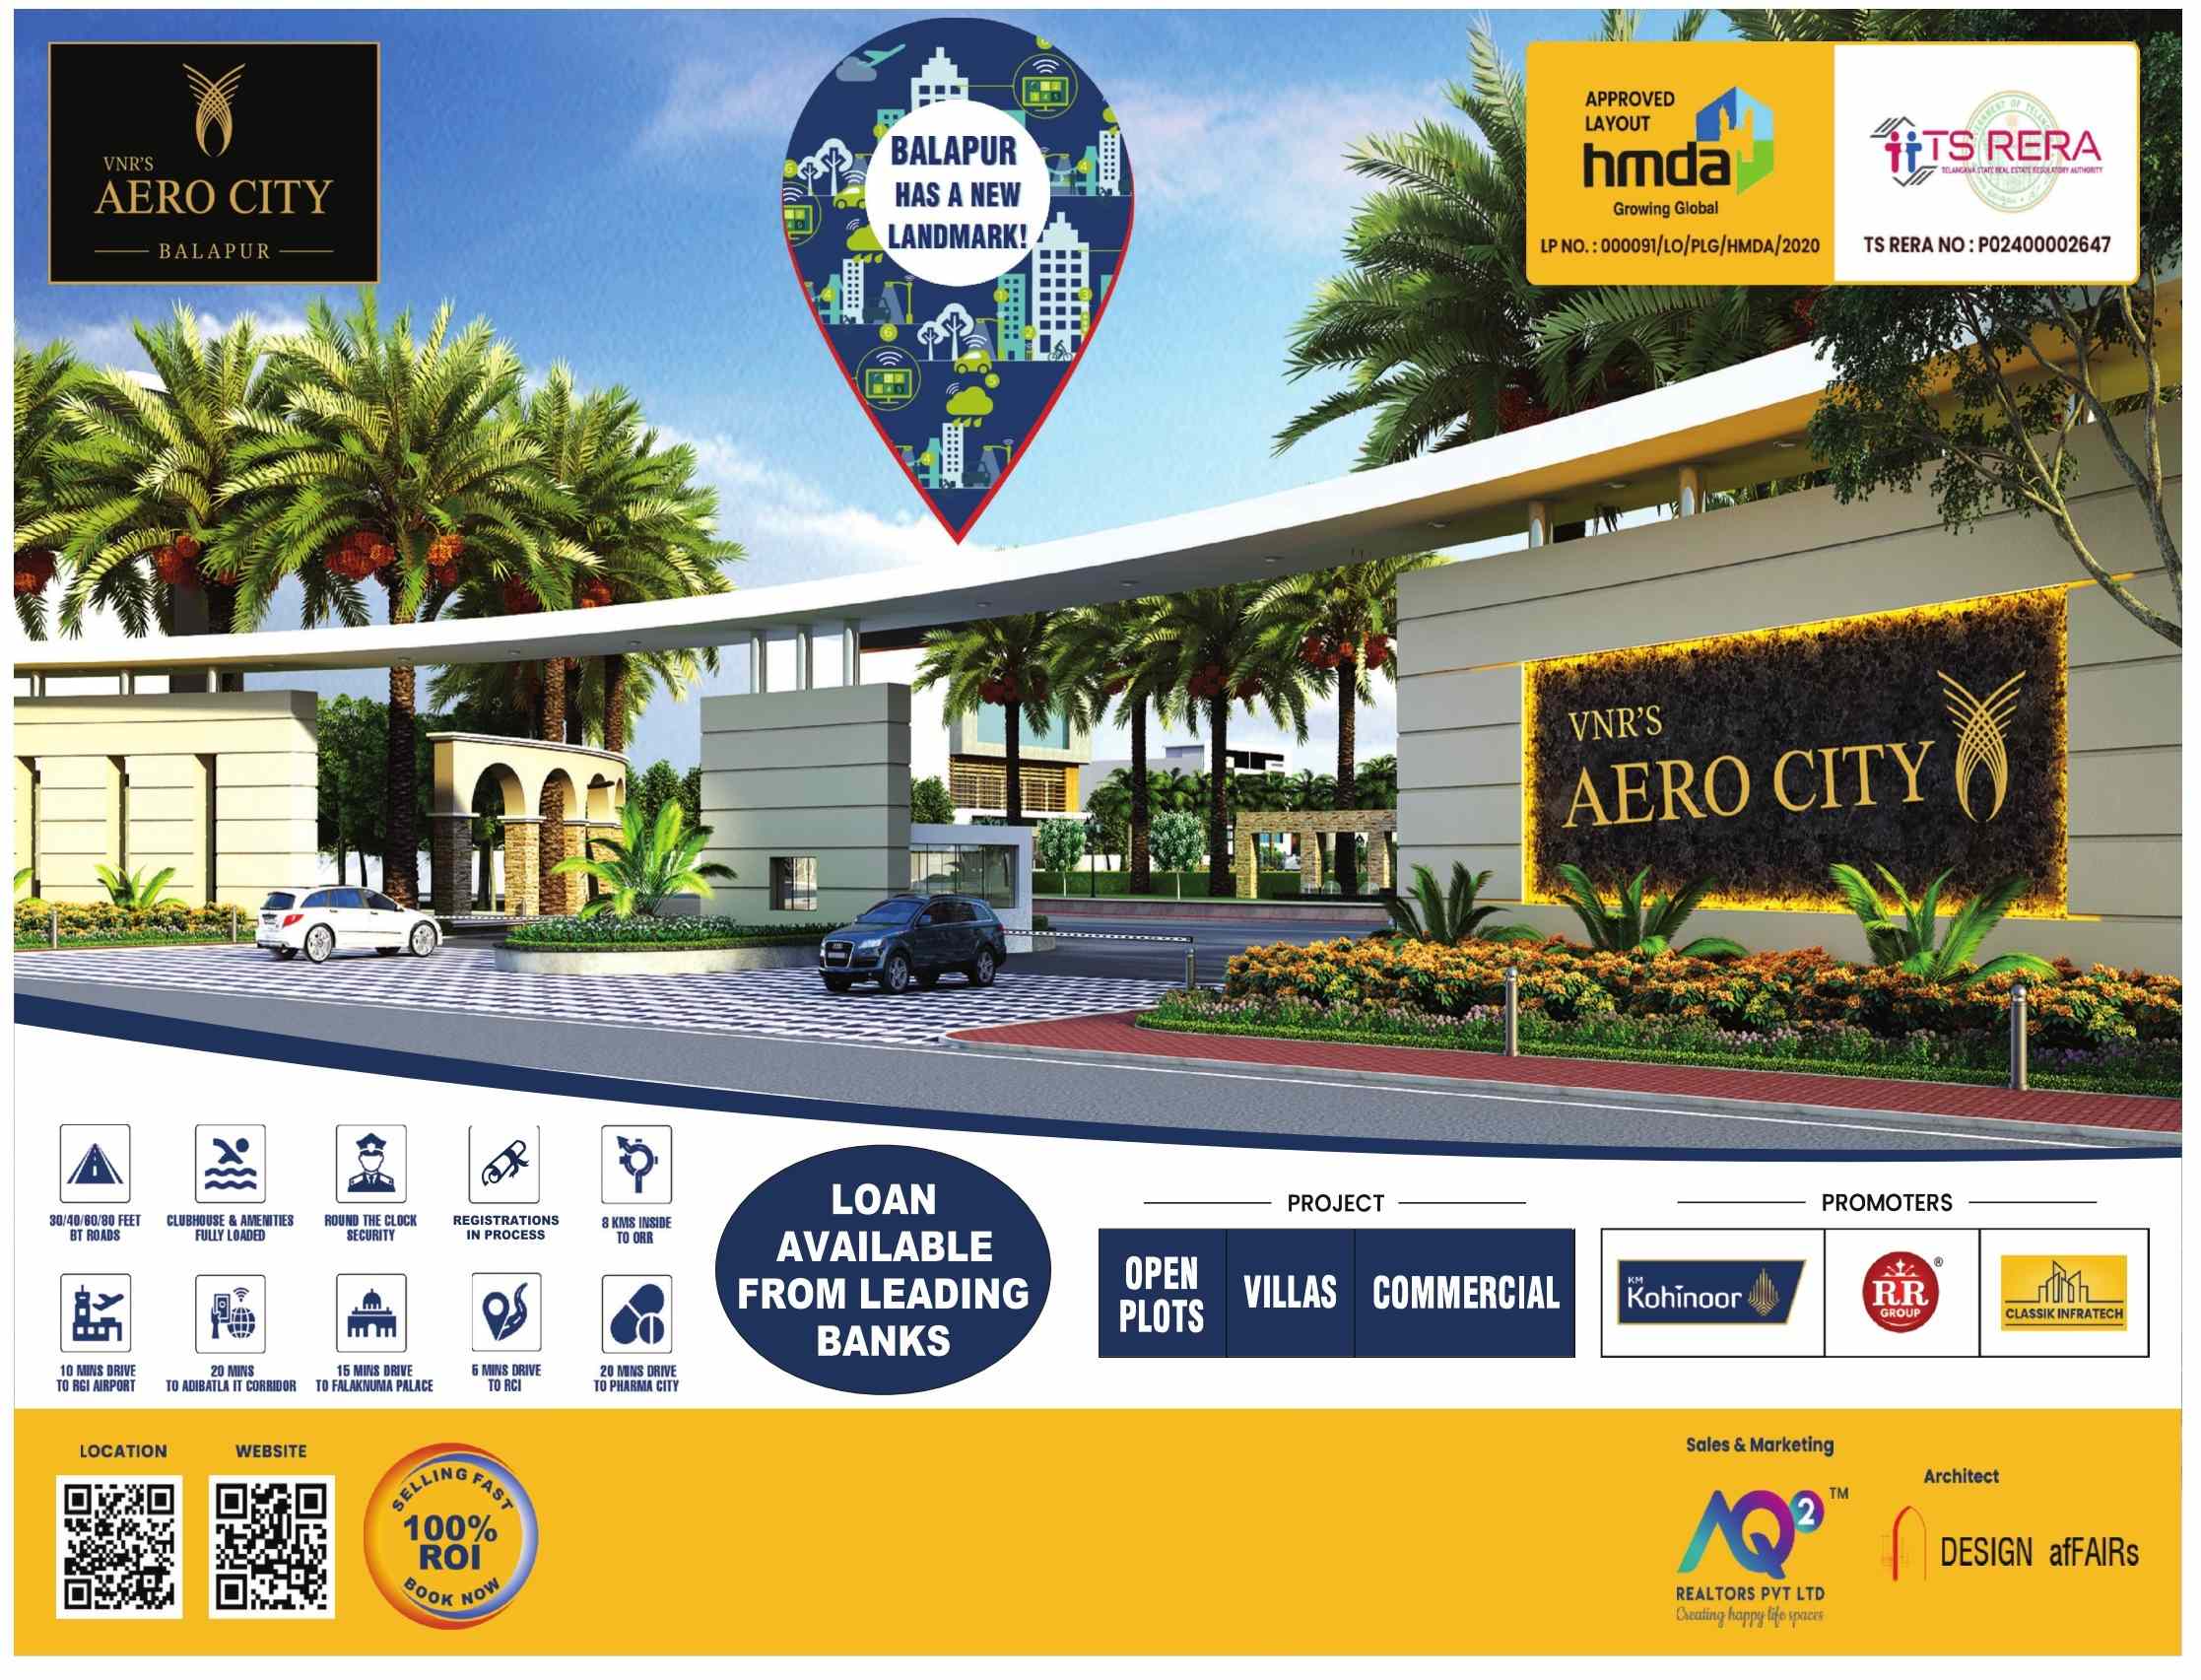 Loan available from leading banks at VNR Aerocity, Hyderabad Update